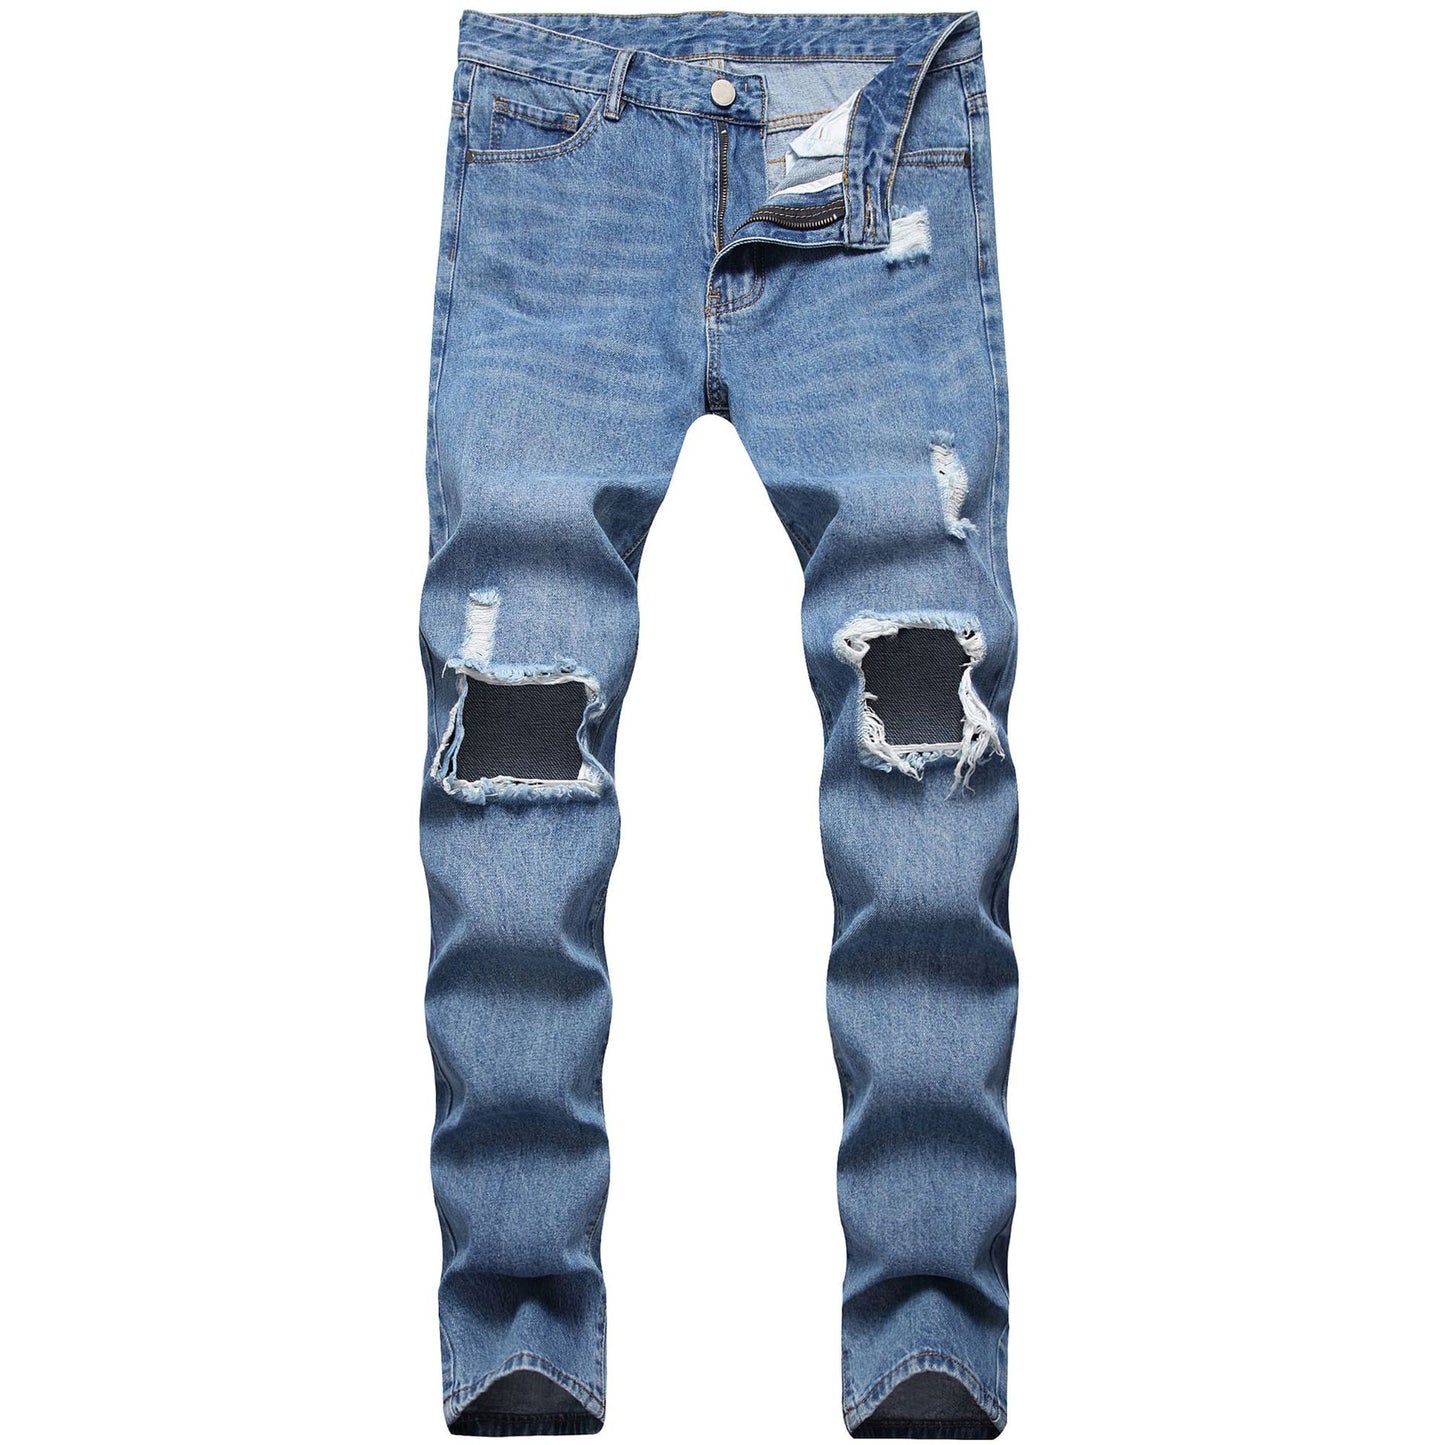 Assortment of Ripped Torn Straight Slim Jeans